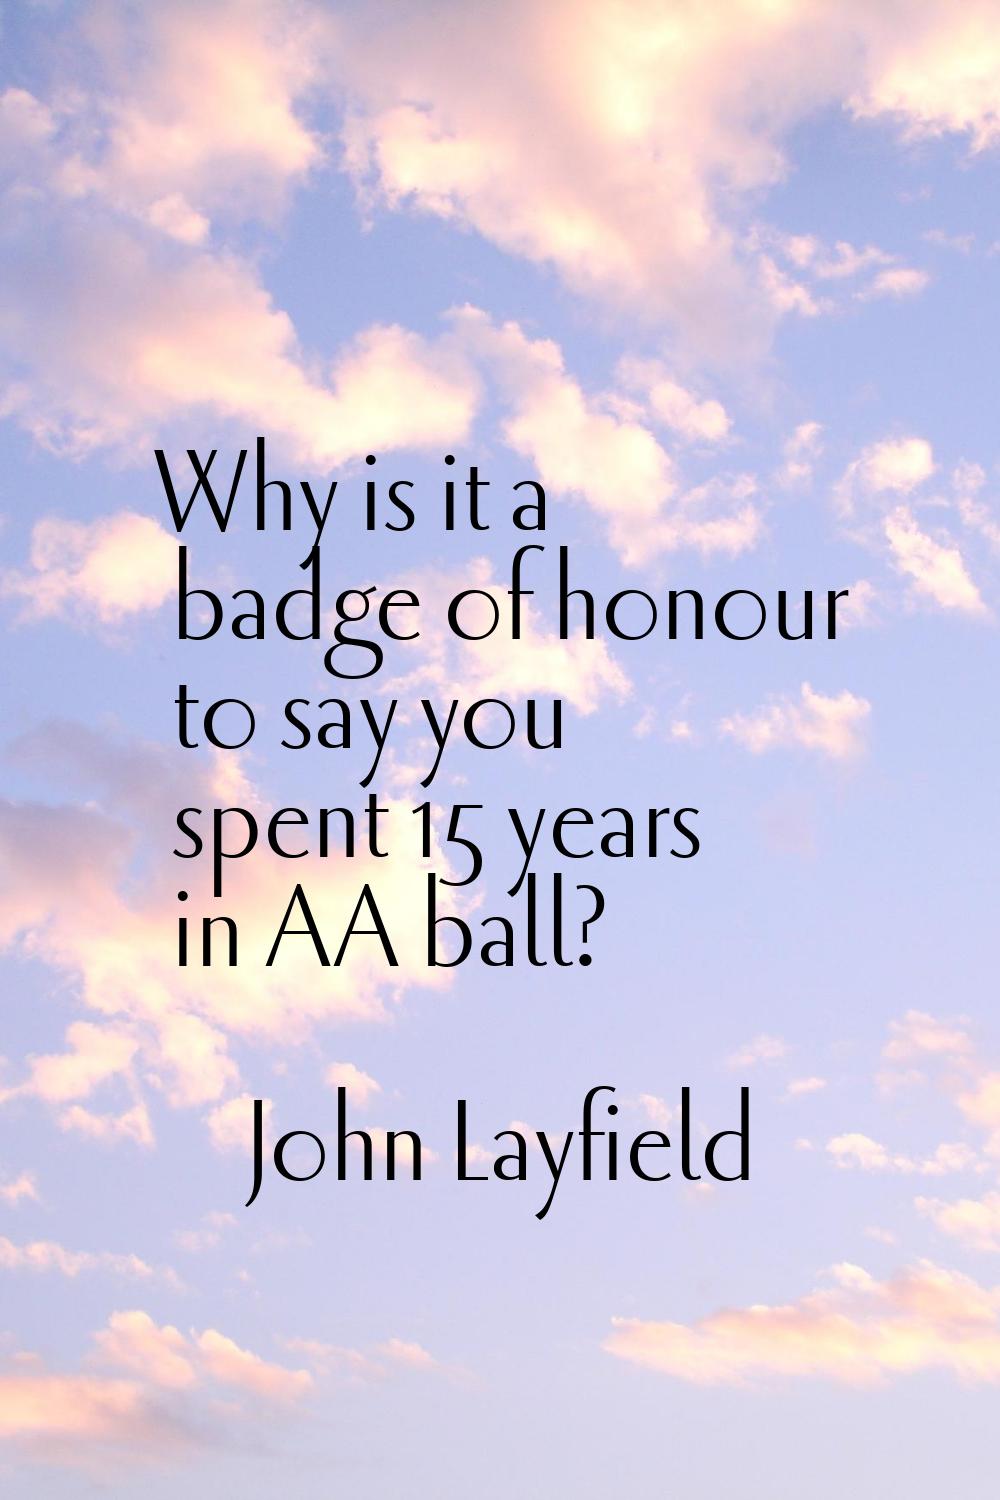 Why is it a badge of honour to say you spent 15 years in AA ball?